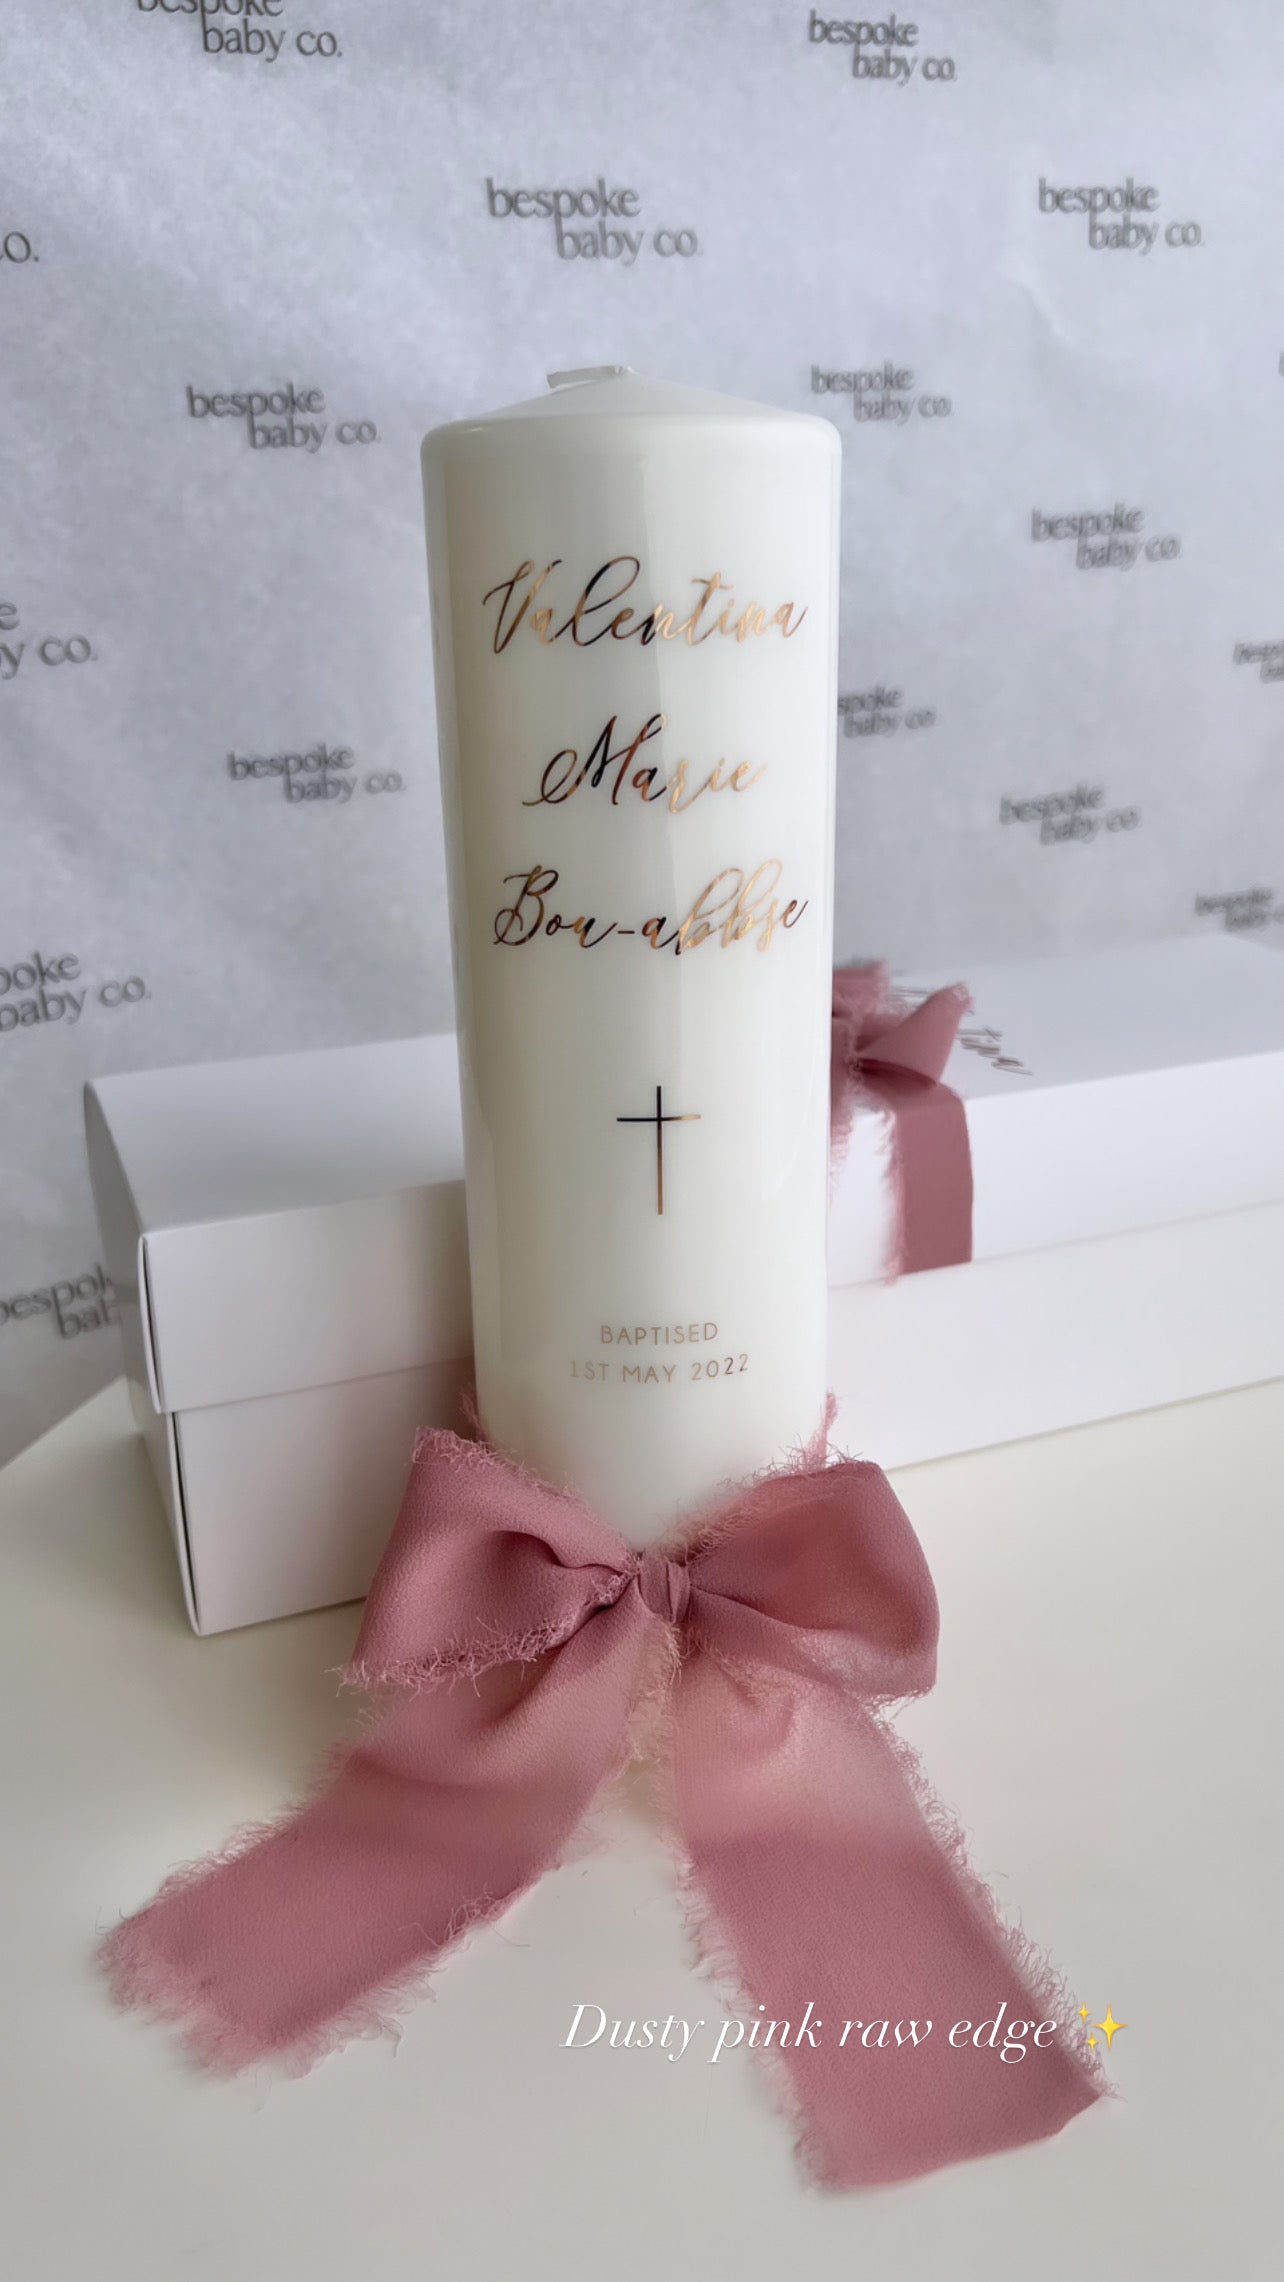 This elegant and personalised candle will become a cherished keepsake that continues to light your child’s path.